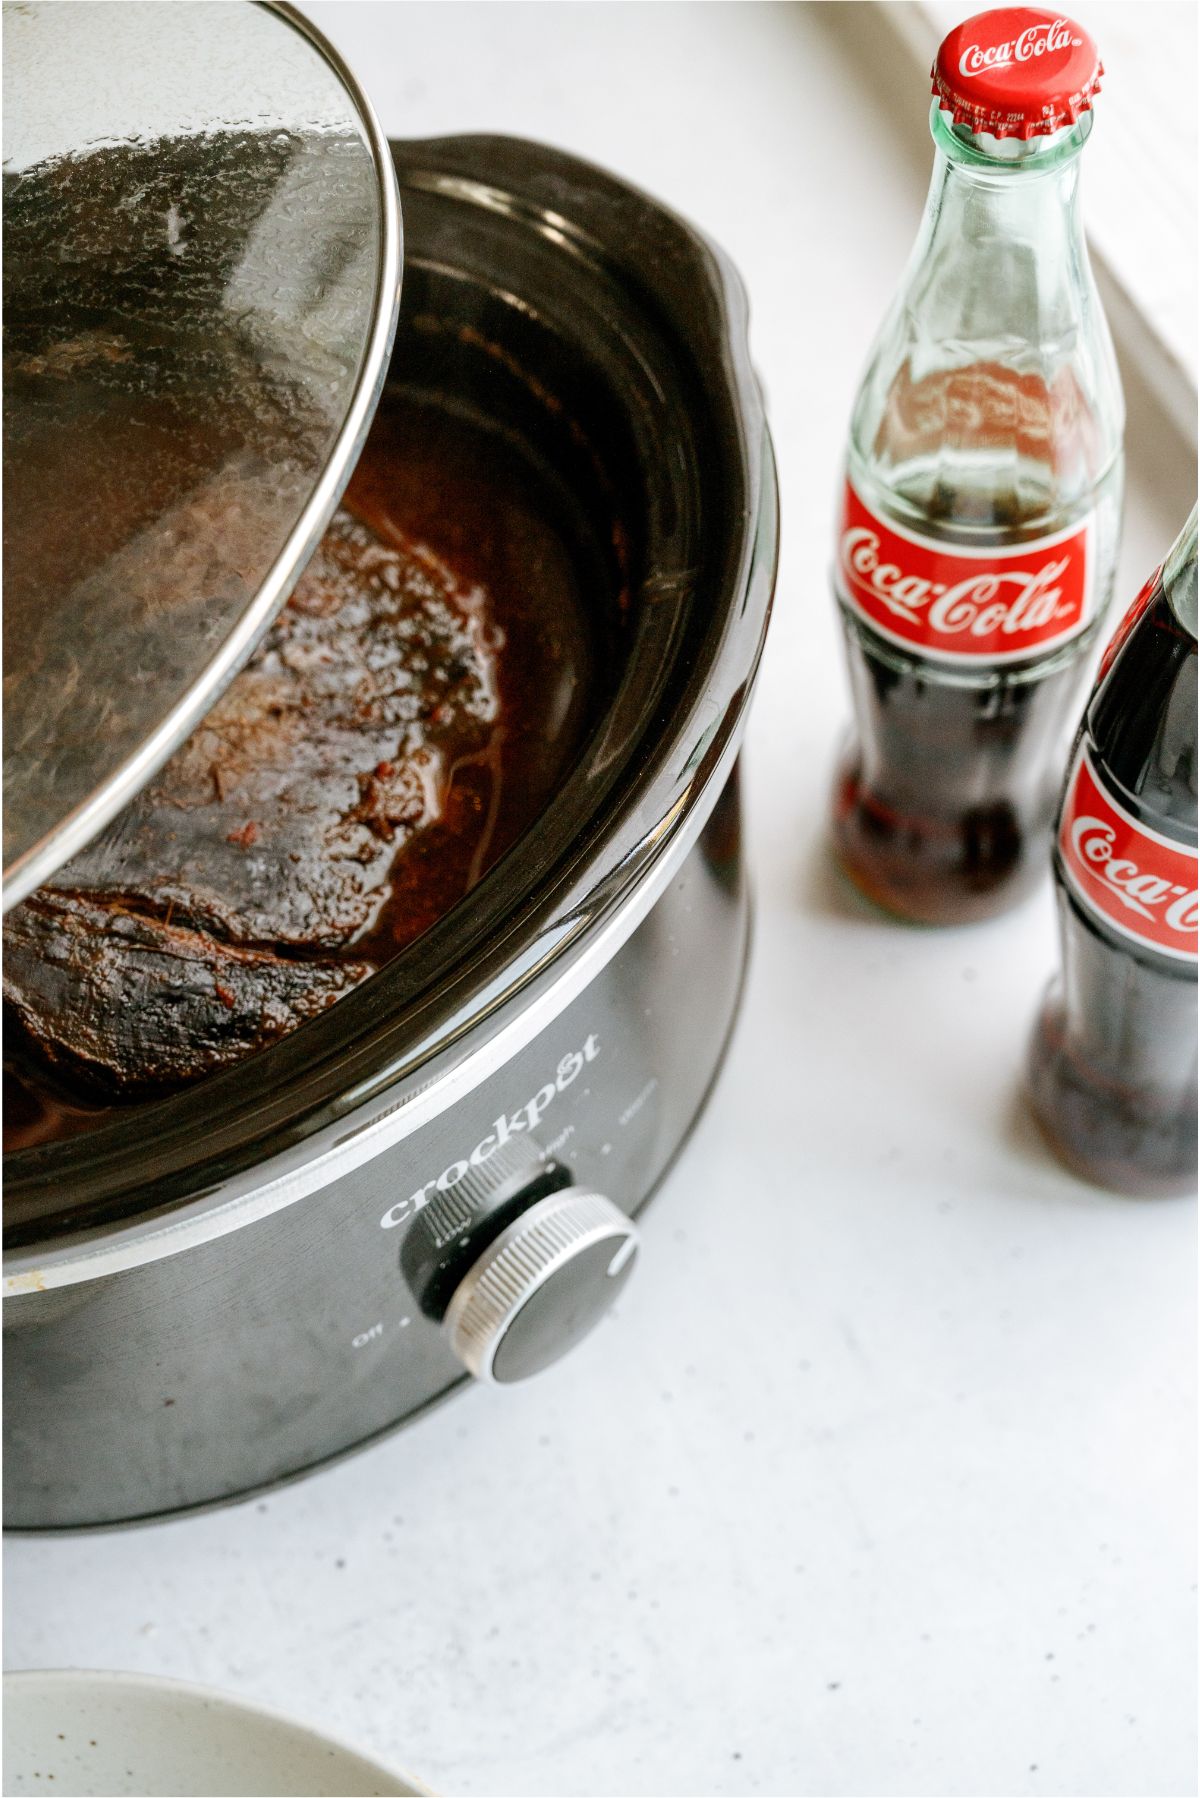 Slow Cooker Cola BBQ Roast Beef in the slow cooker with 2 bottles of coke on the side